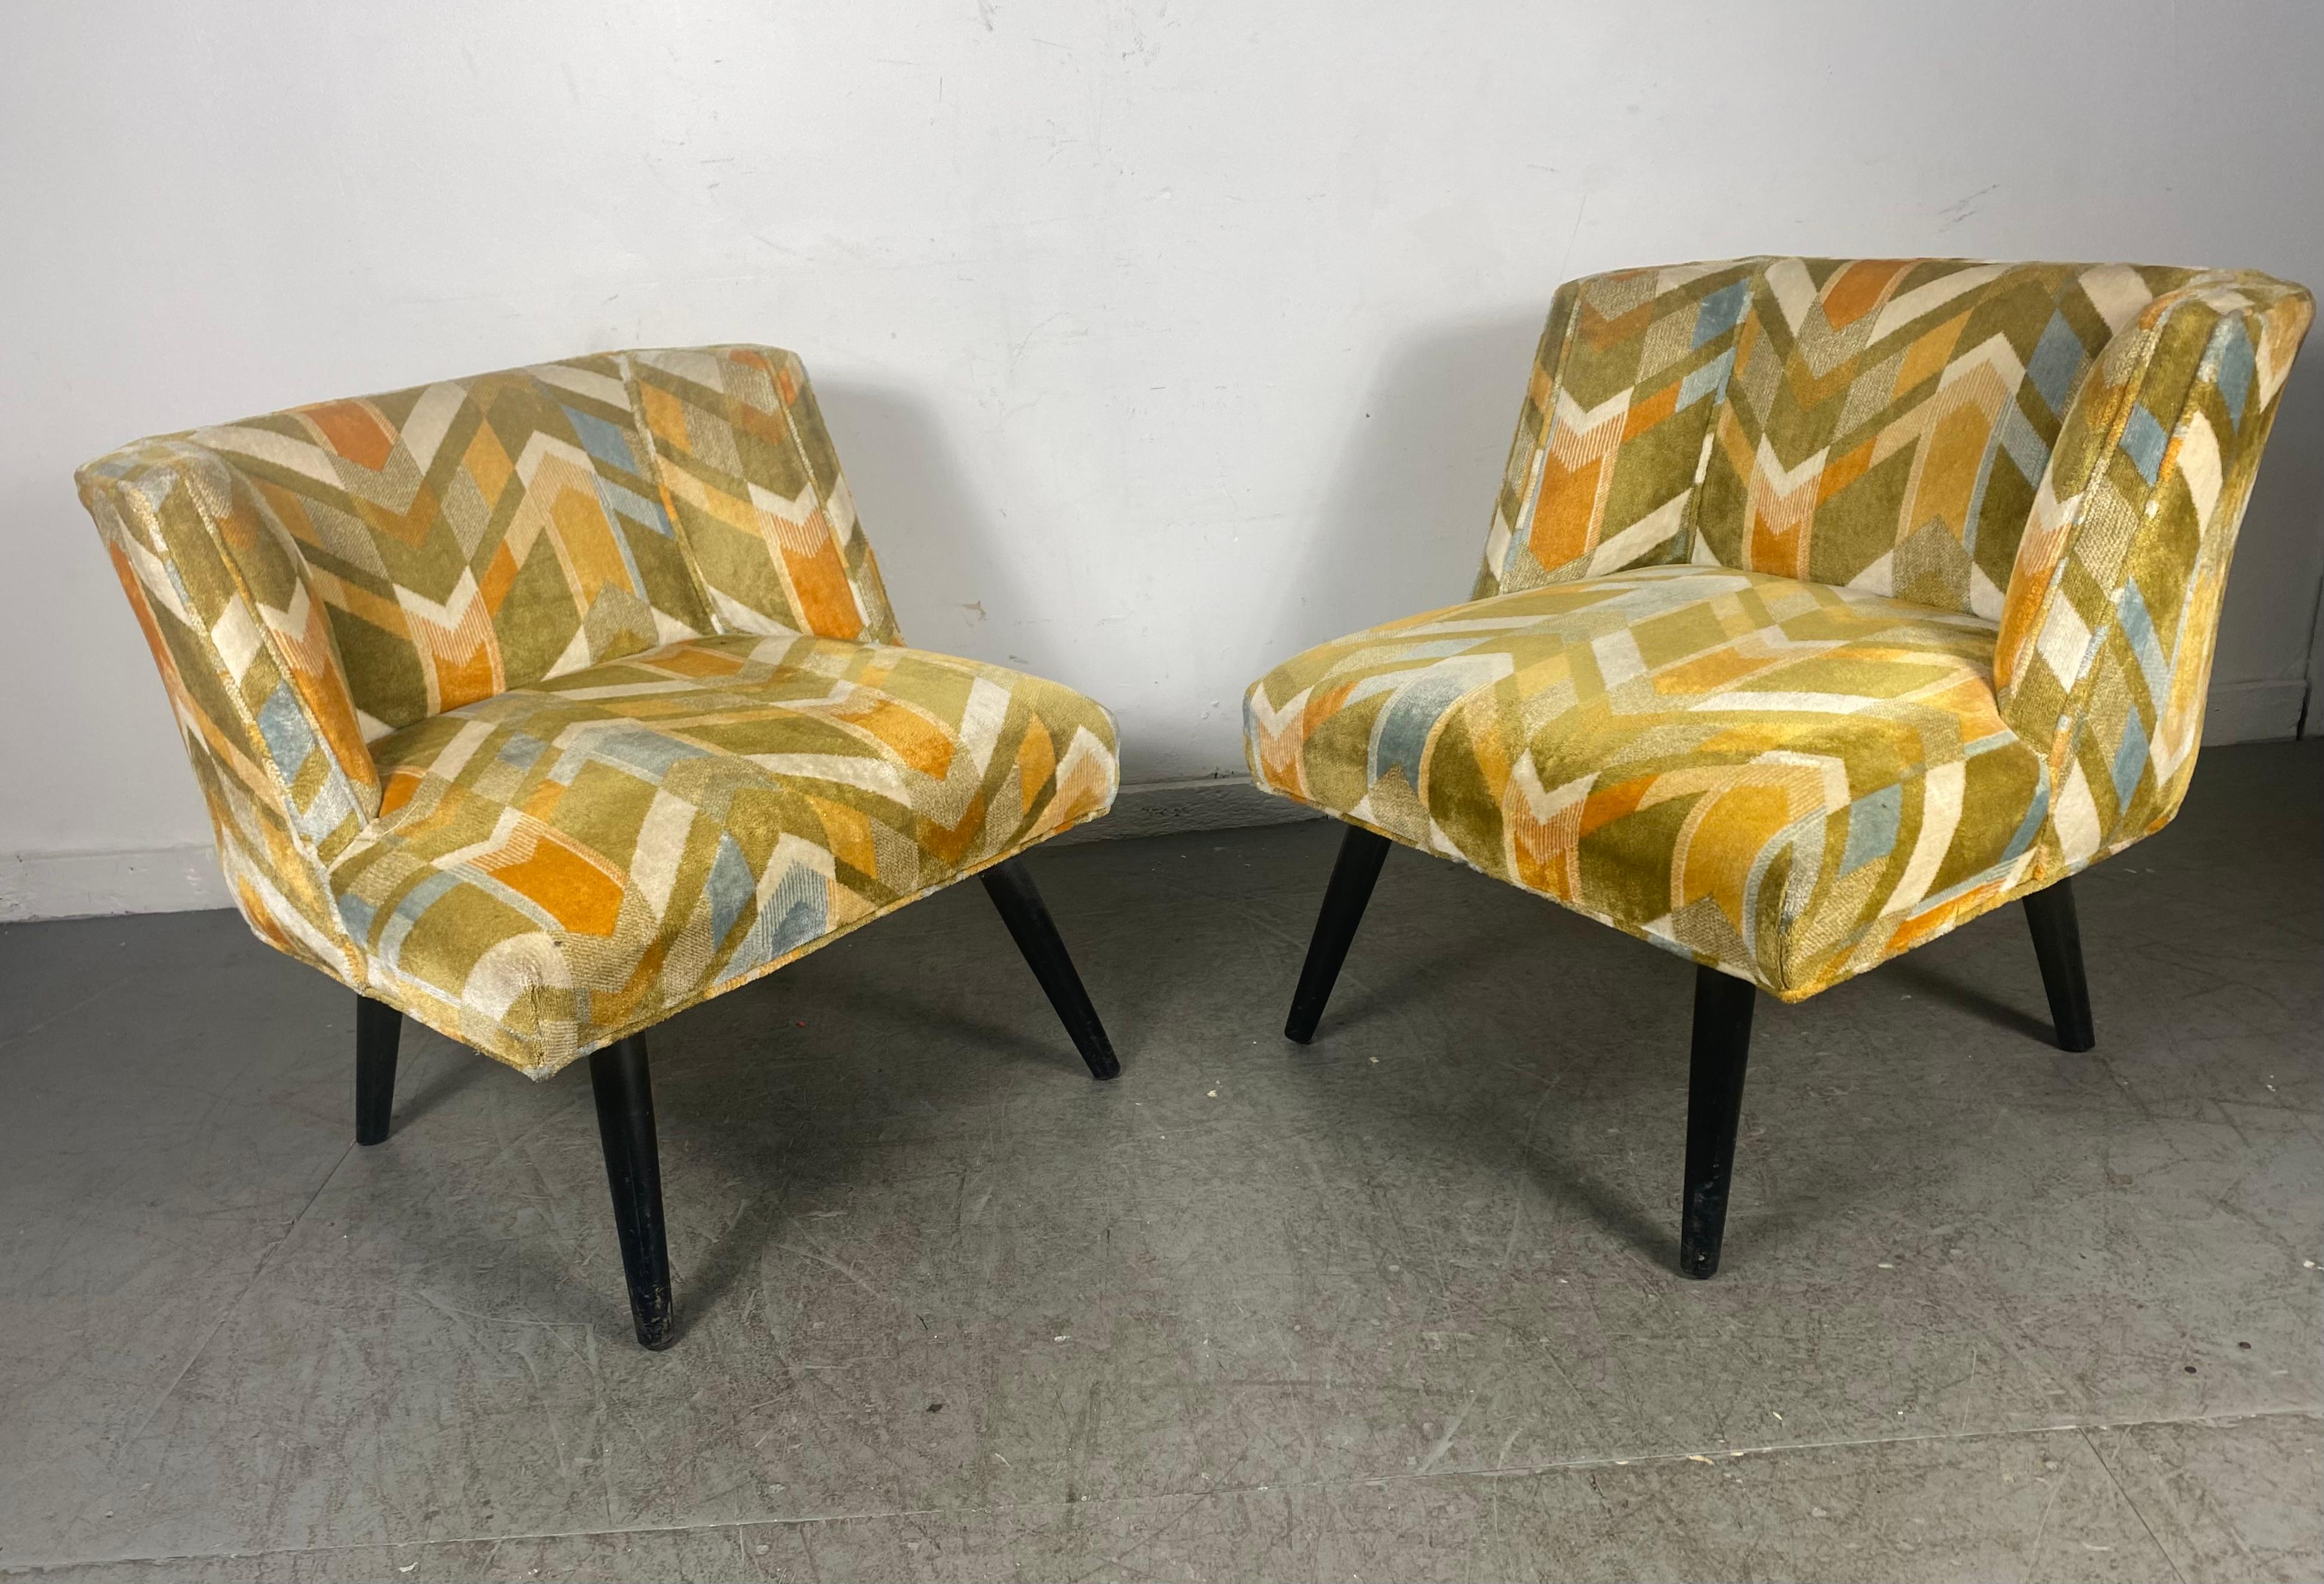 Upholstery Pair Modernist Lounge Chairs, California Modern Manner of James Mont